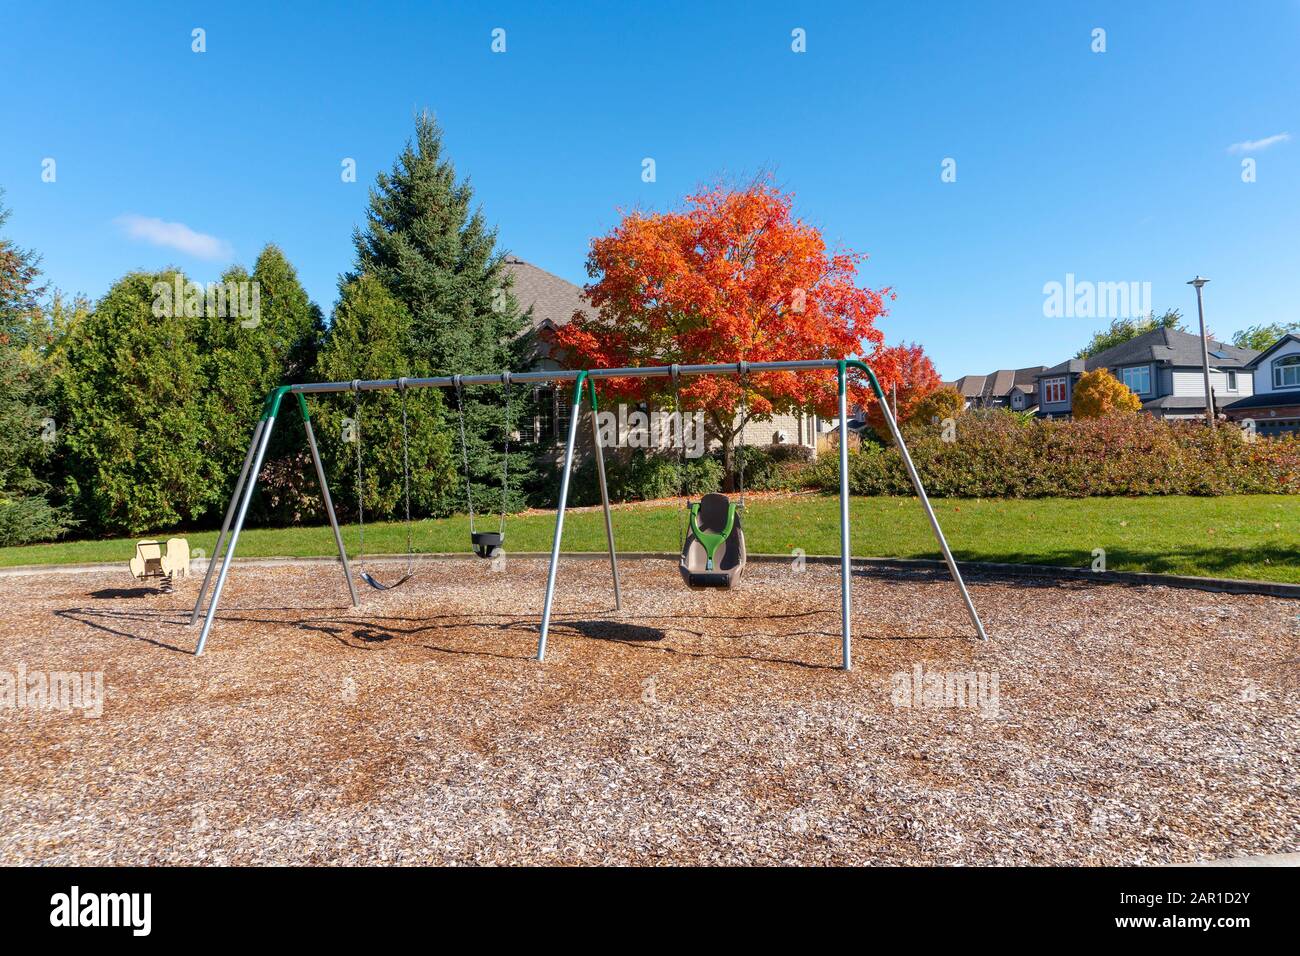 Swing on the playground against red maple tree on a sunny morning Stock Photo